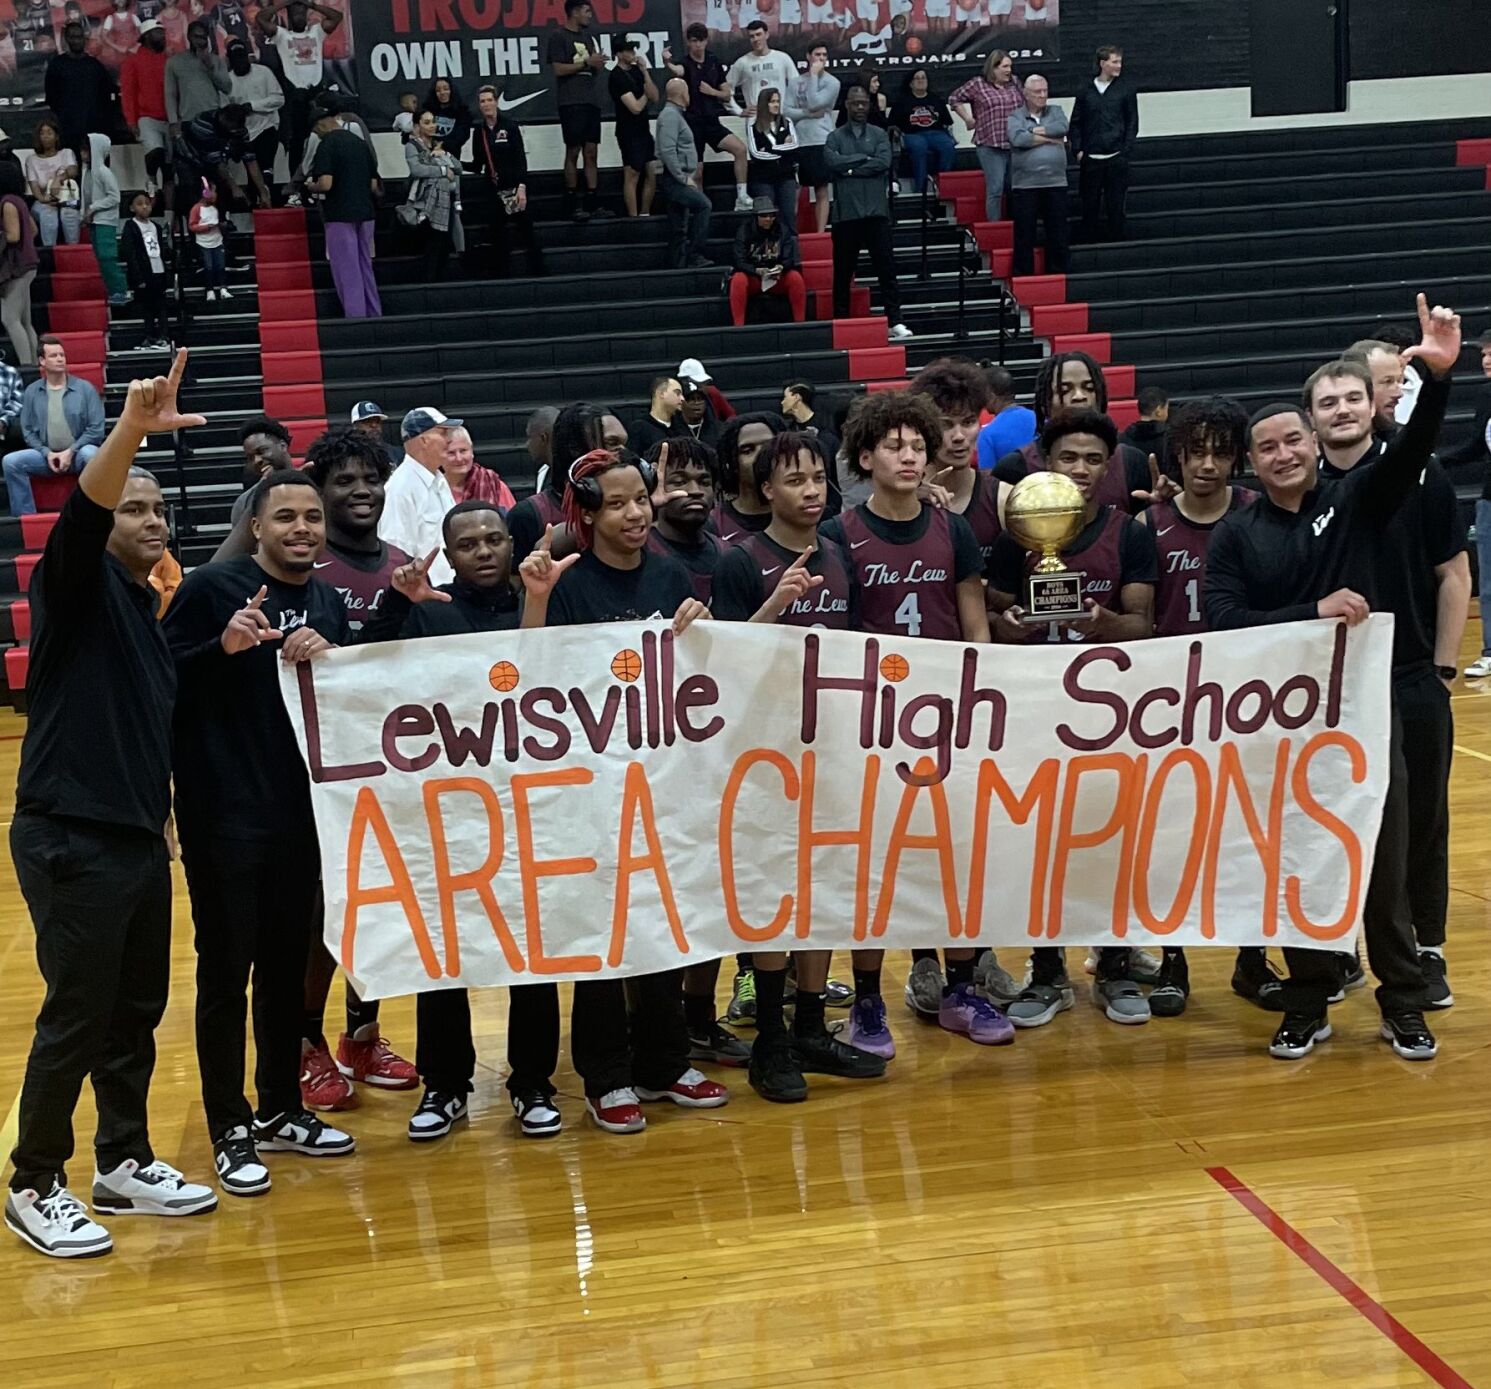 Lewisville and The Colony Advance in Exciting Class 6A Basketball Showdown